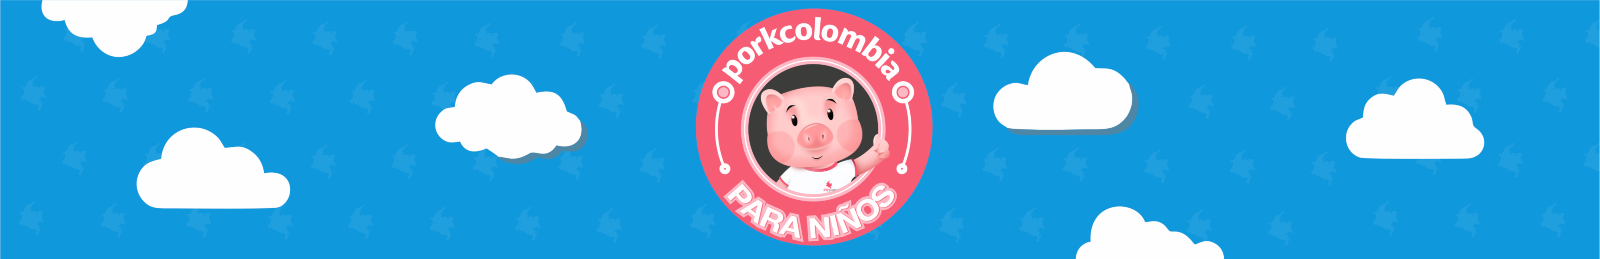 https://transparencia.porkcolombia.co/wp-content/uploads/2020/08/Banner-niños-Porkcolombia.png